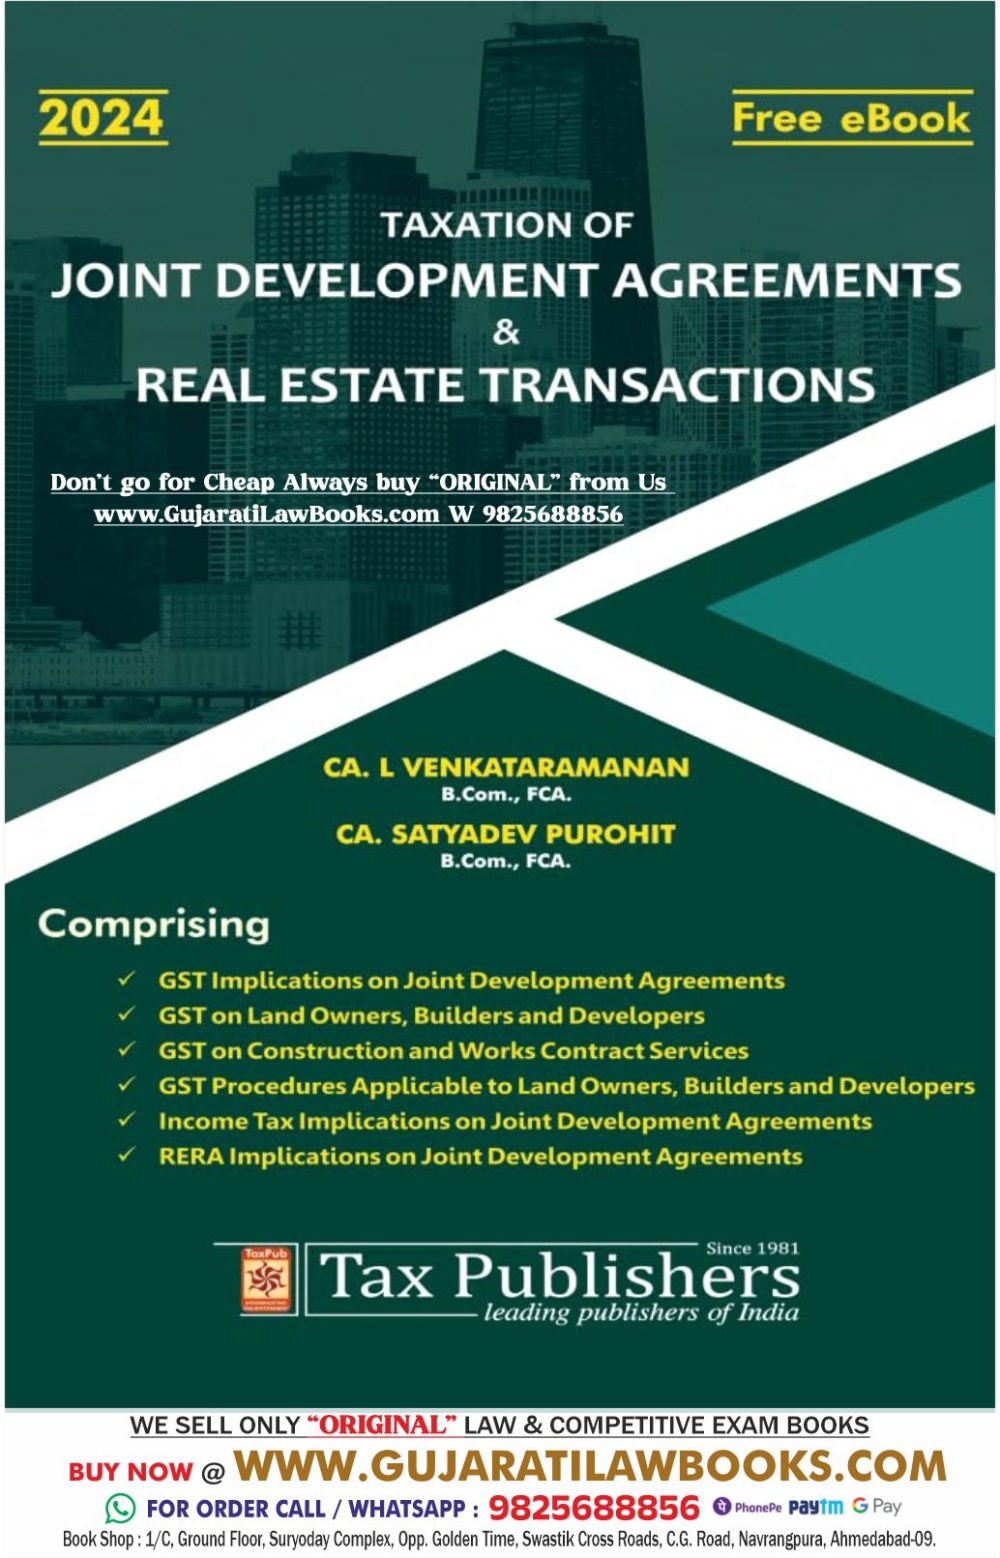 Taxation of JOINT DEVELOPMENT AGREEMENTS & REAL ESTATE TRANSACTIONS - Latest 2024 Edition Tax Publishers